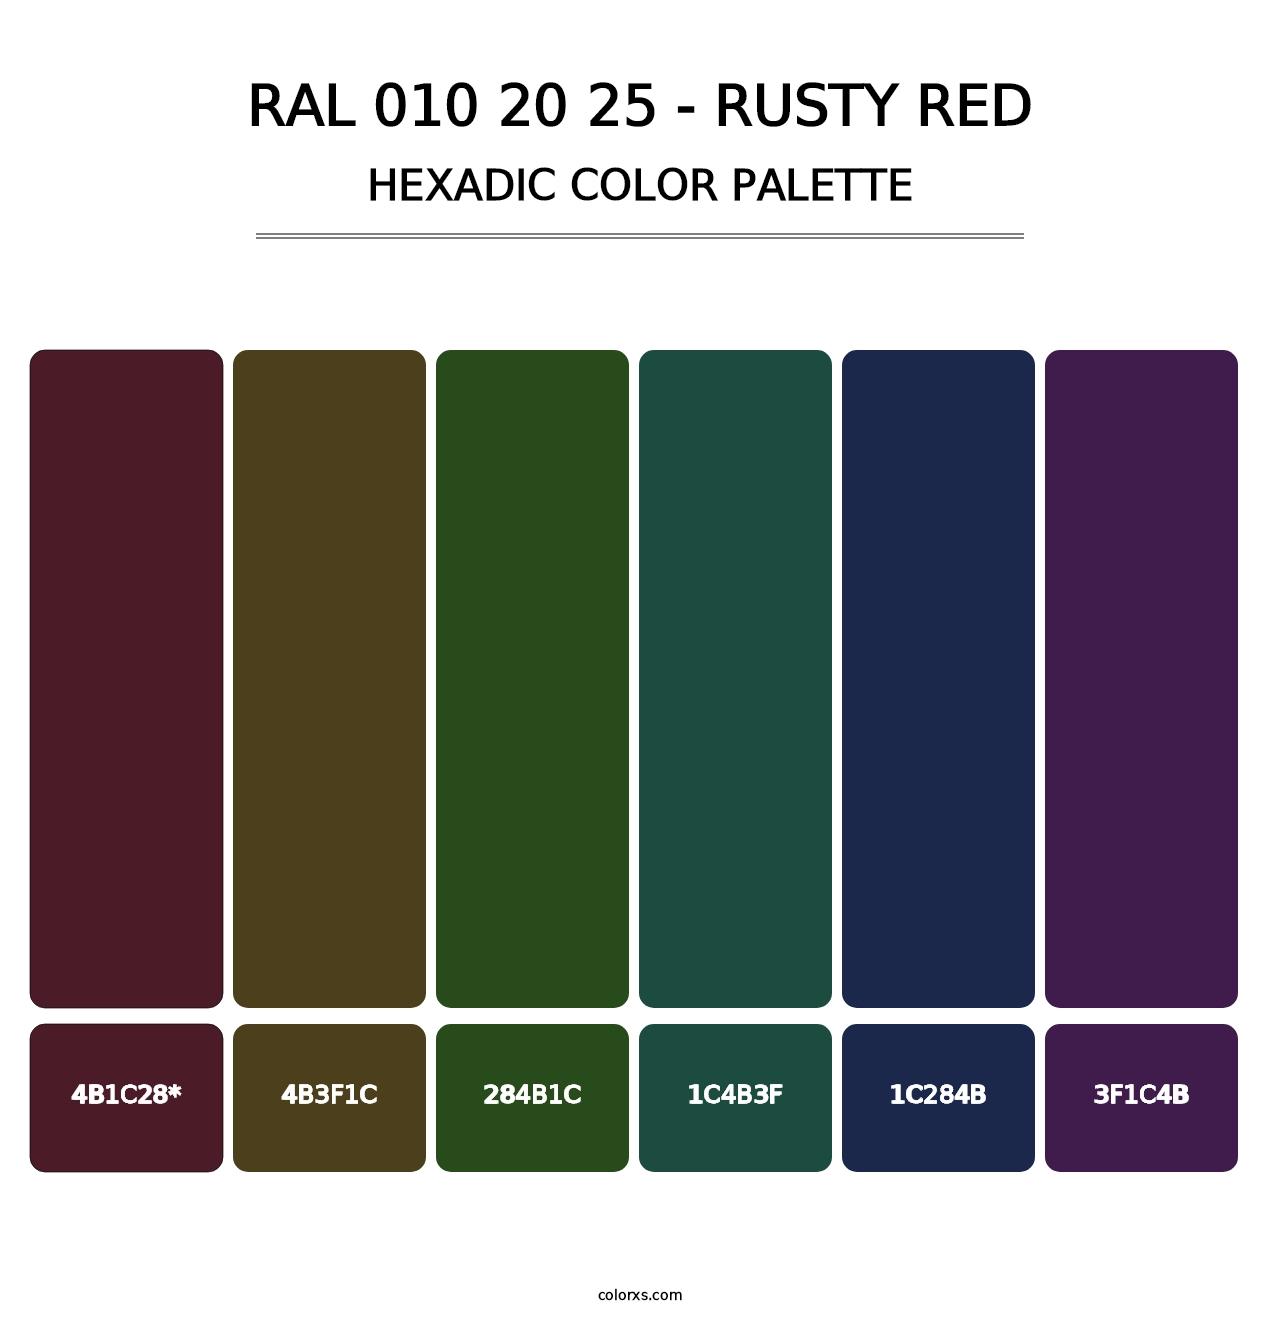 RAL 010 20 25 - Rusty Red - Hexadic Color Palette